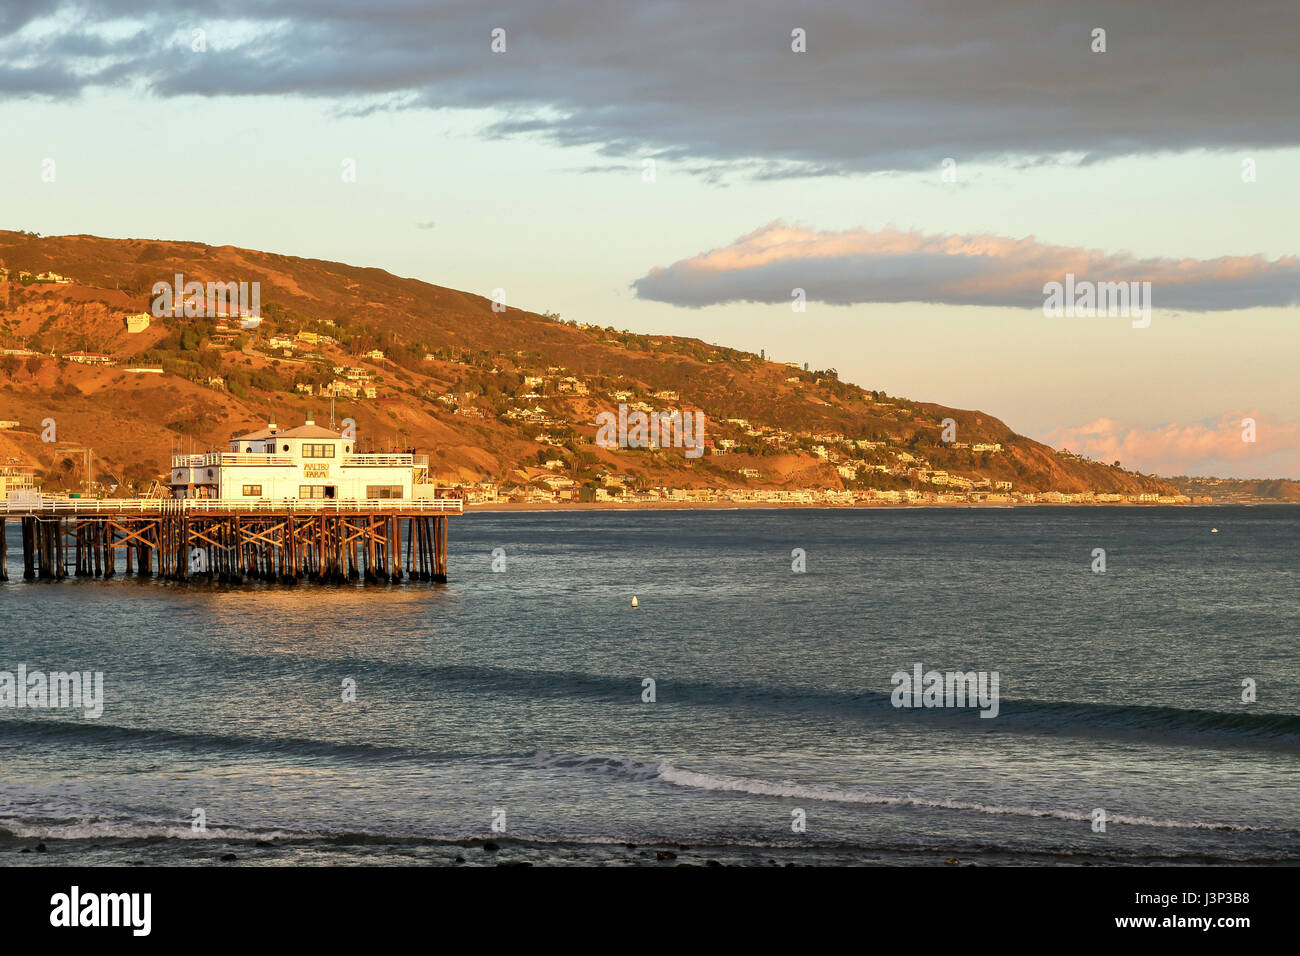 Sun is about to set at Malibu Pier casting warm lights to the hills, Malibu California Stock Photo